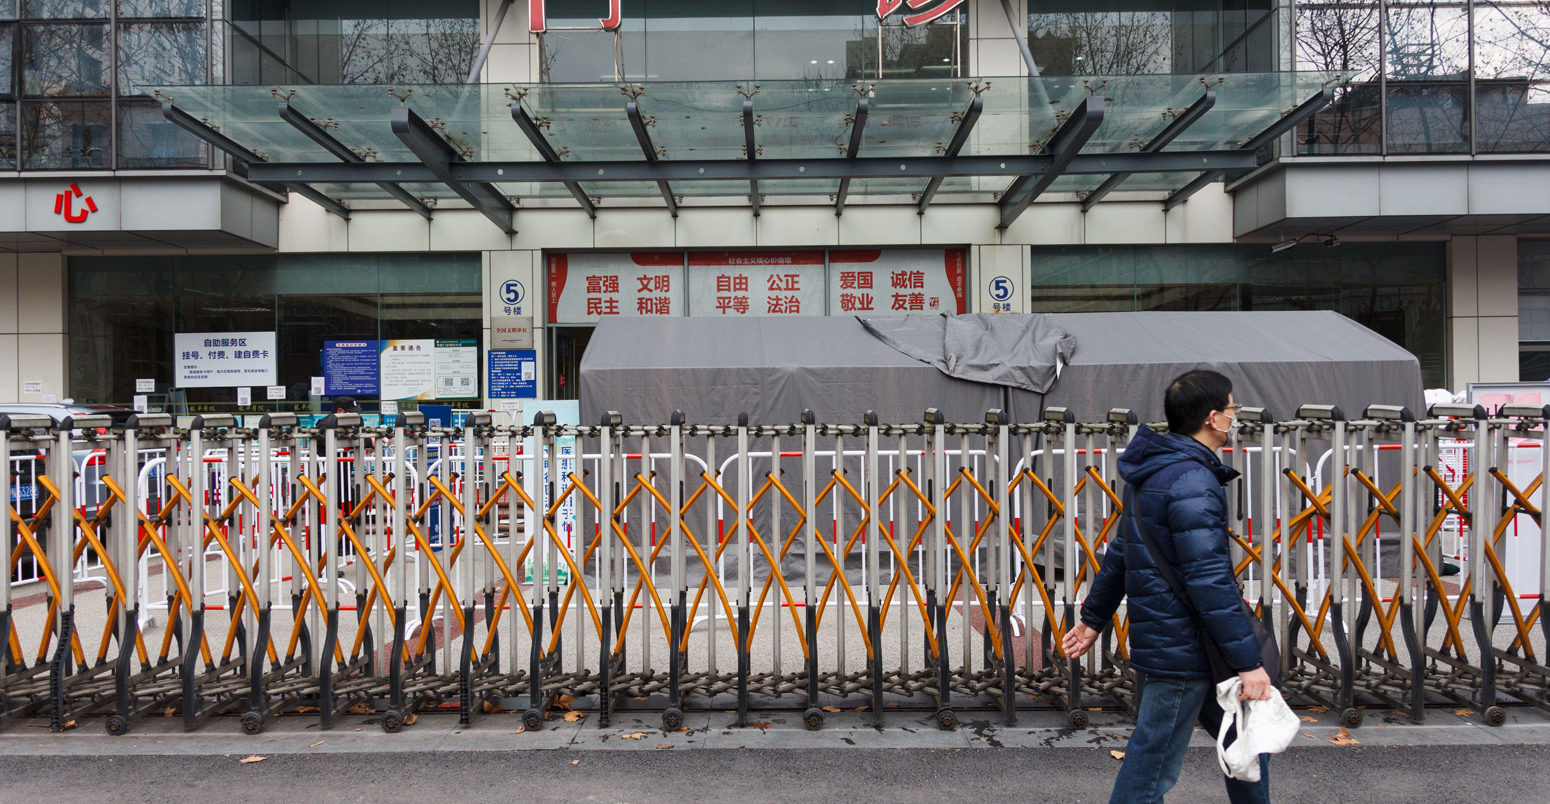 Hospital main gate closed over tighter patient control after Coronavirus outbreak in China.